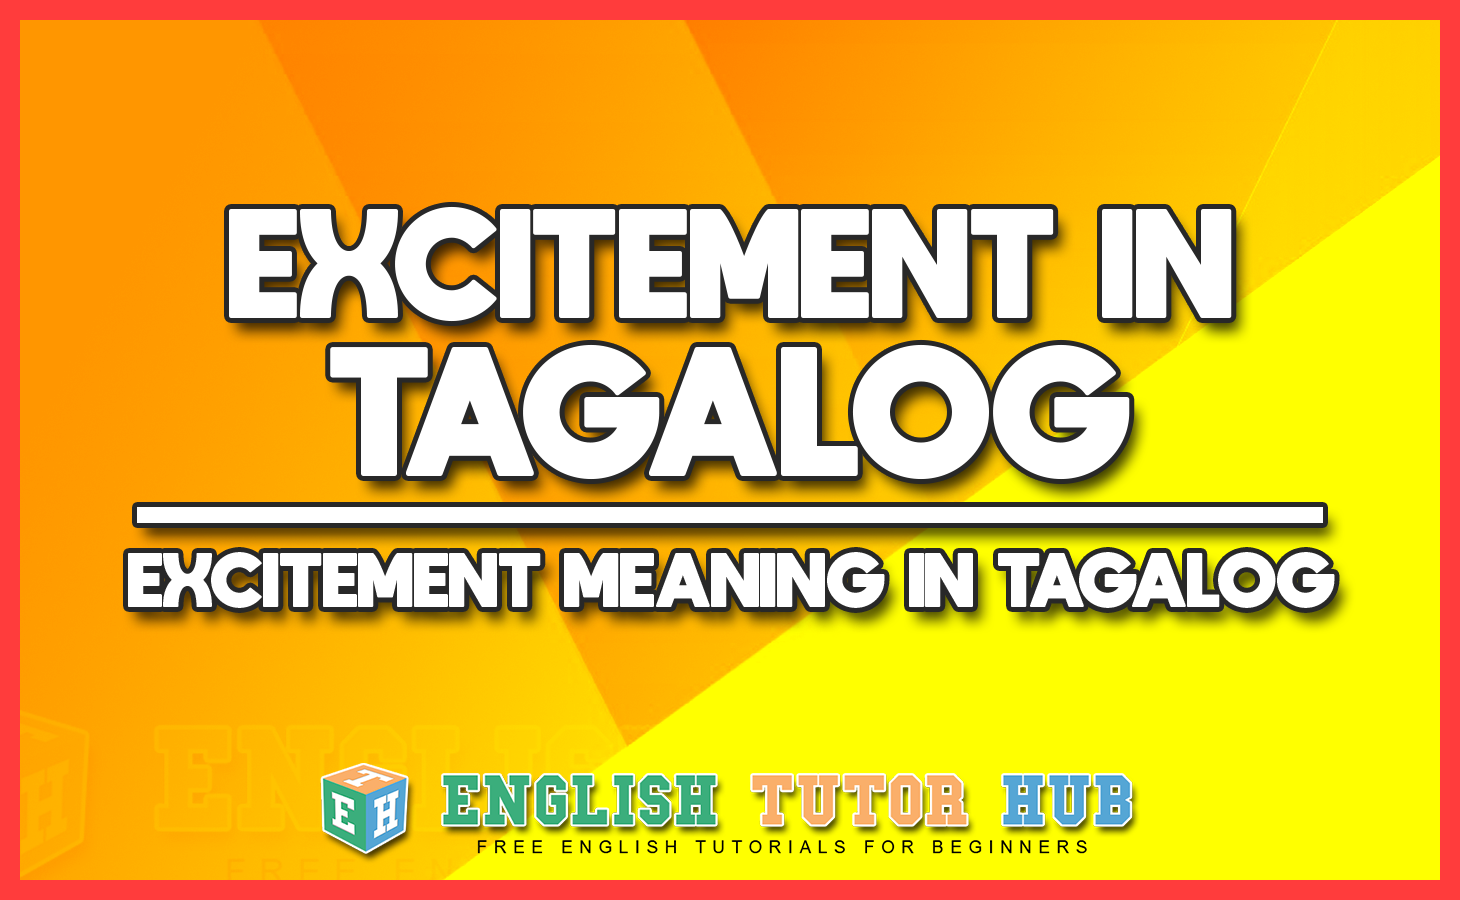 EXCITEMENT IN TAGALOG - EXCITEMENT MEANING IN TAGALOG